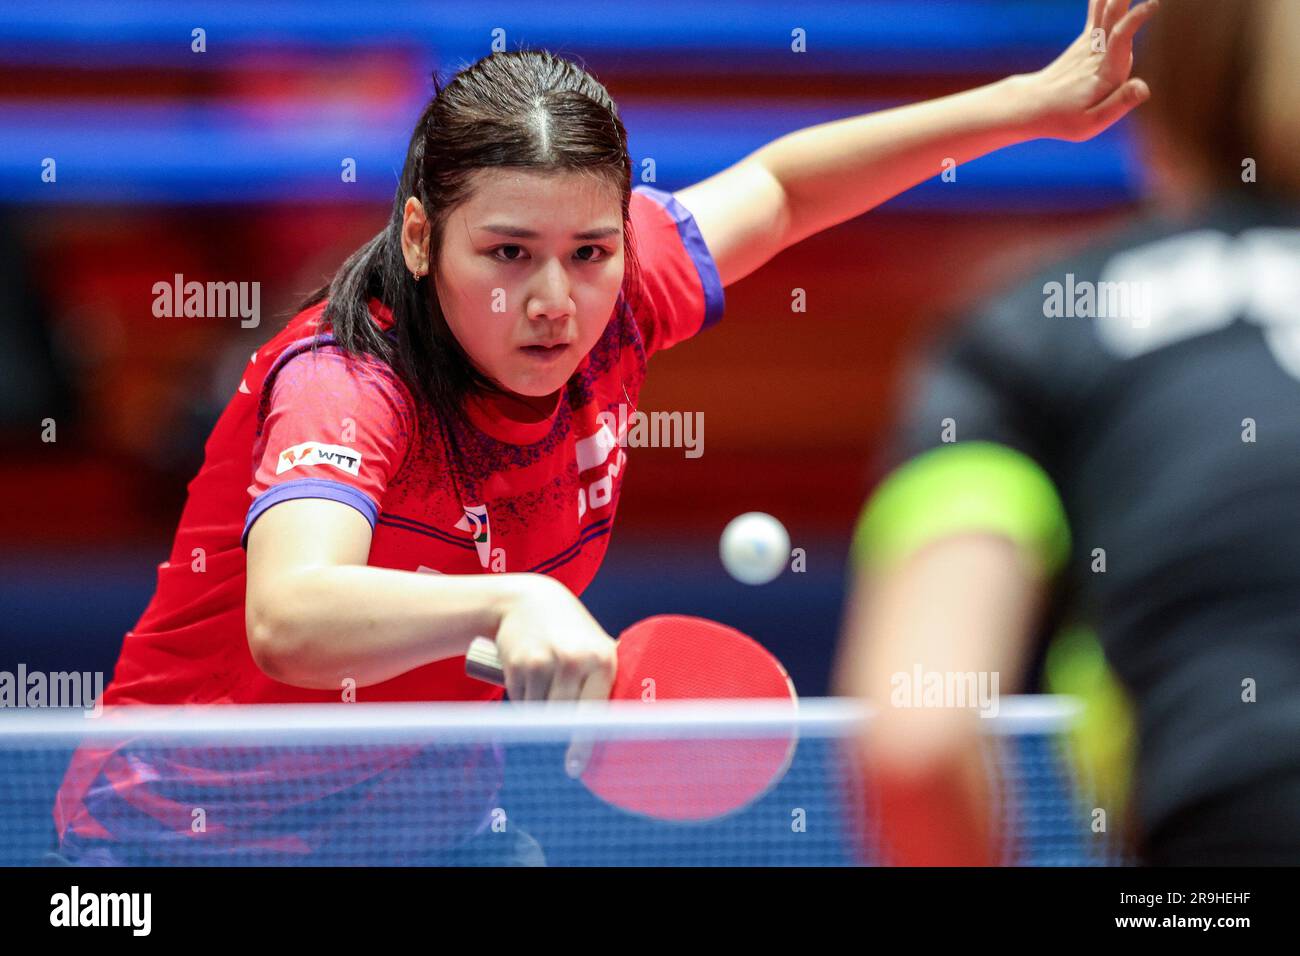 Zagreb. 26th June, 2023. Wong Xin Ru of Singapore competes during the women's singles qualification round 1 match against Chantal Mantz of Germany at the WTT Contender Zagreb 2023 in Zagreb, Croatia on June 26, 2023. Credit: Igor Kralj/PIXSELL via Xinhua/Alamy Live News Stock Photo